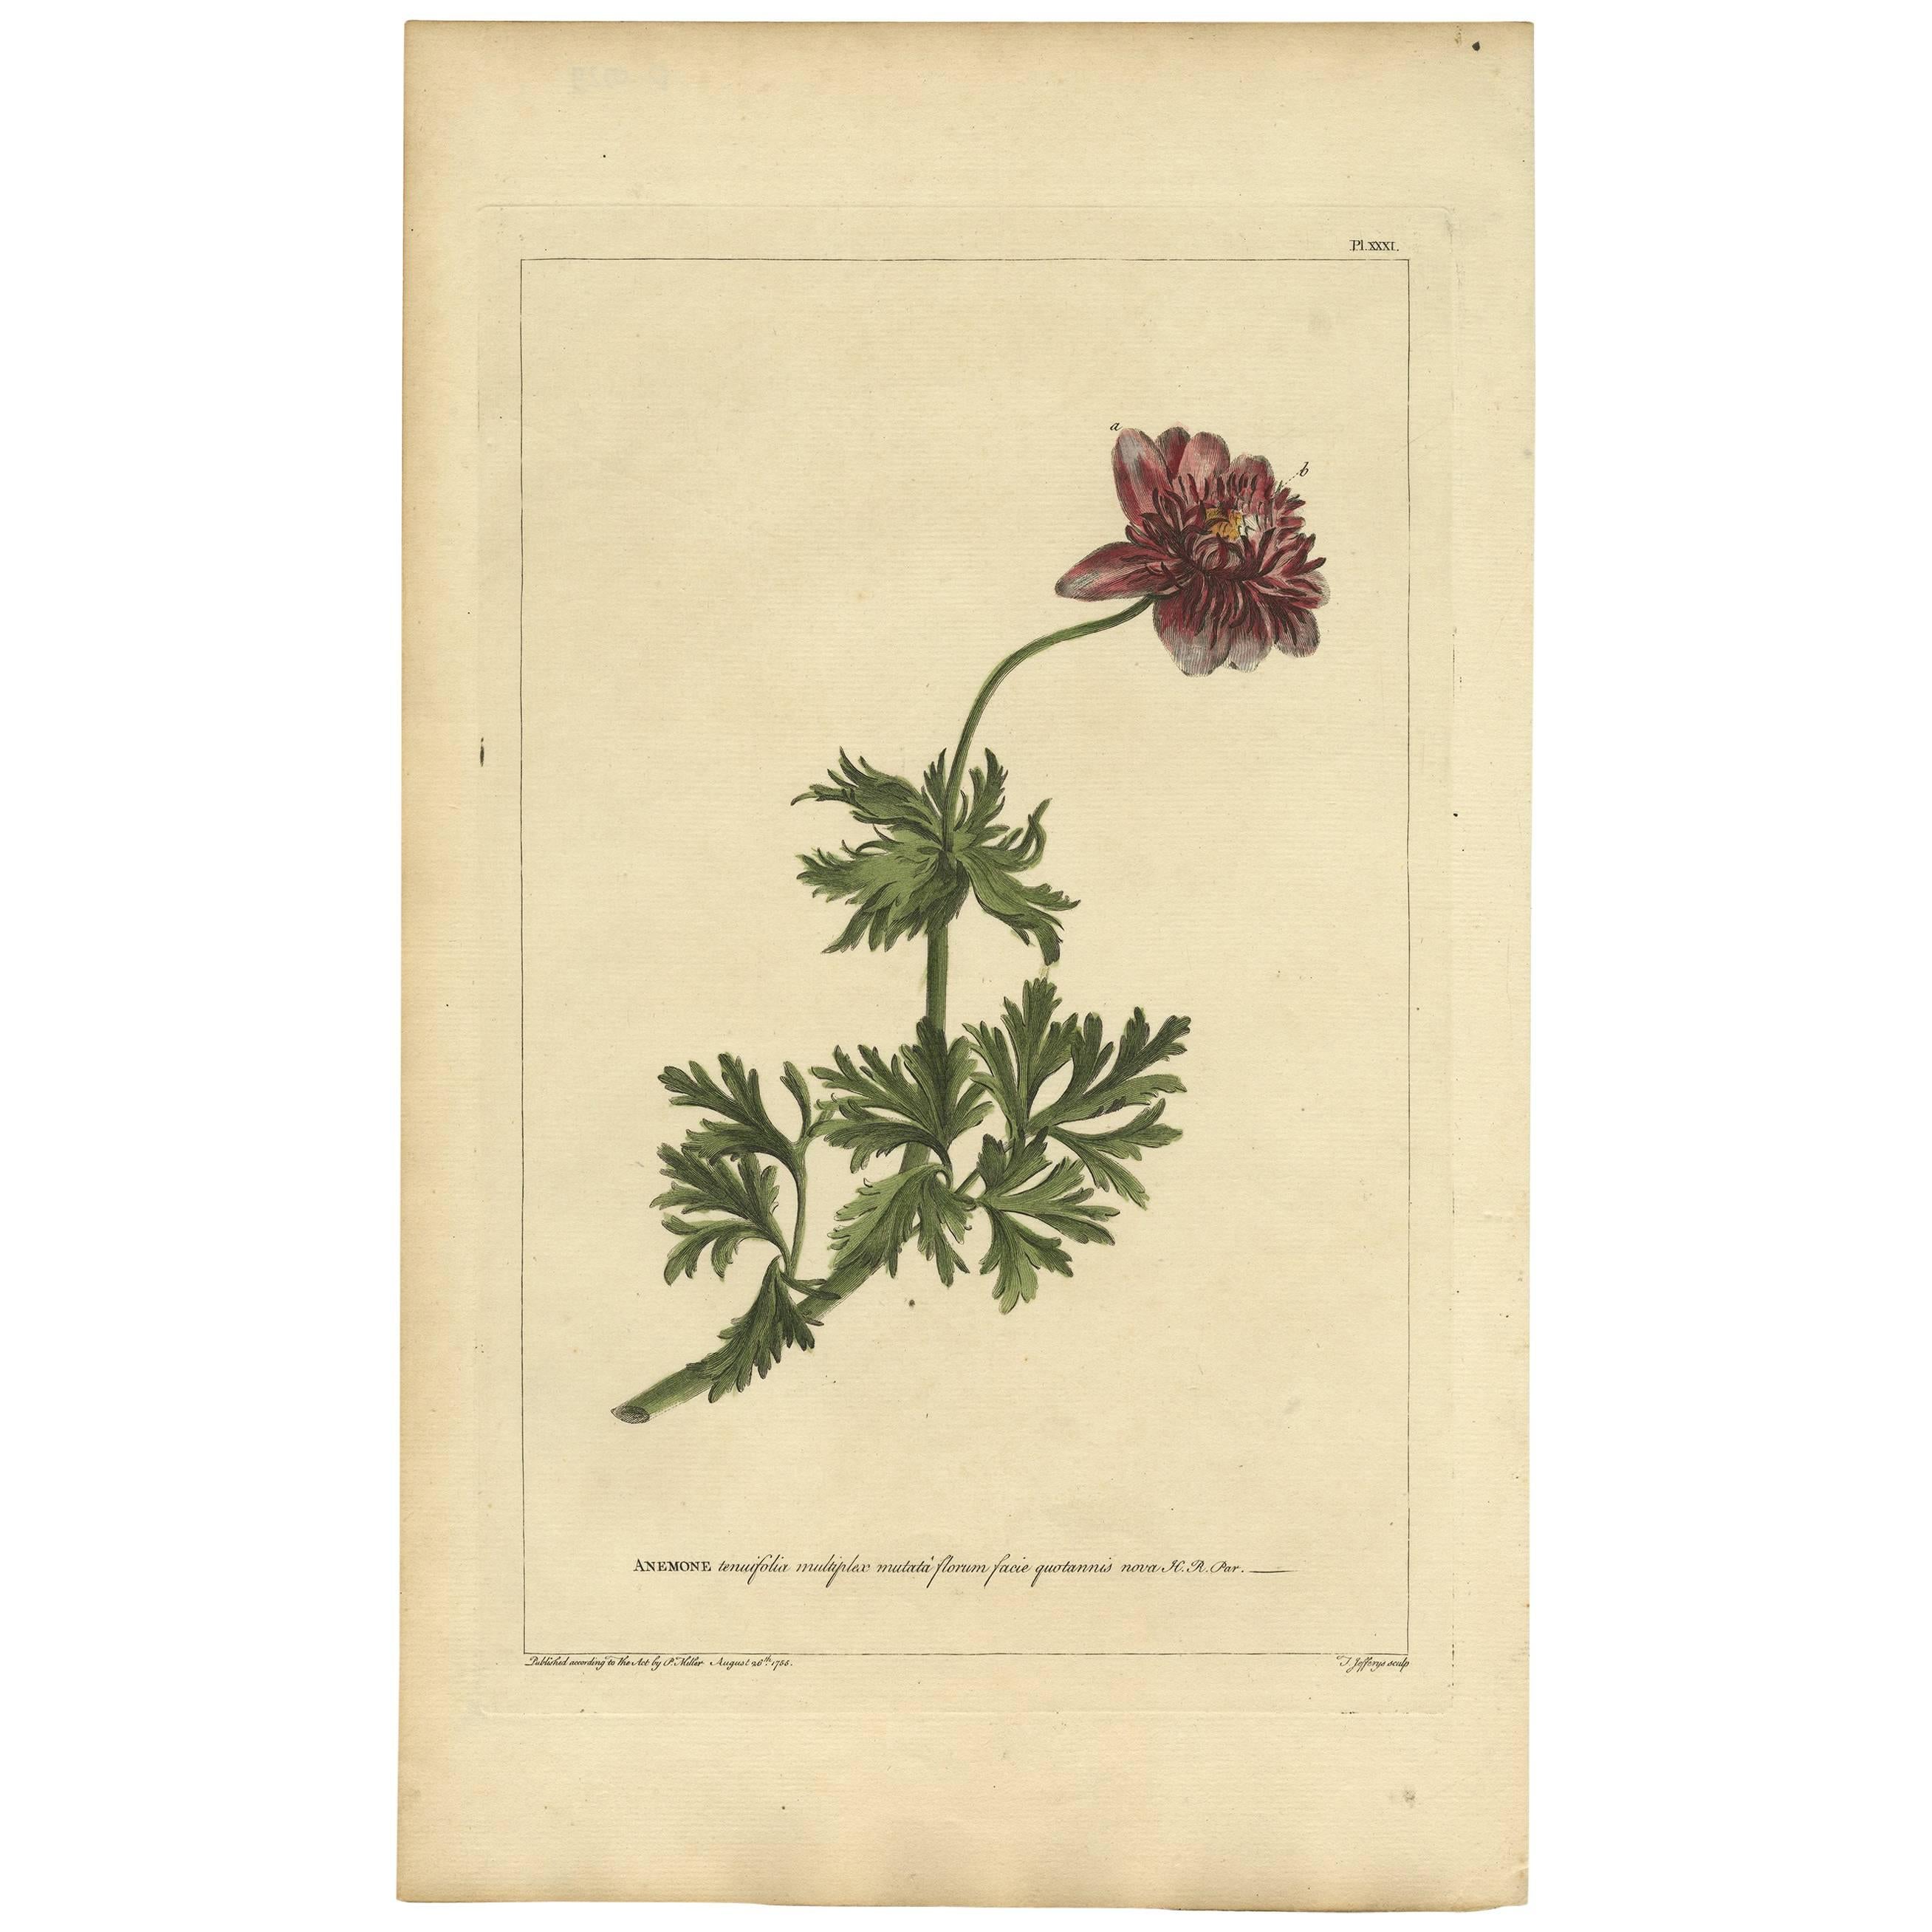 Antique Flower Print 'Anemone' by P. Miller, 1755